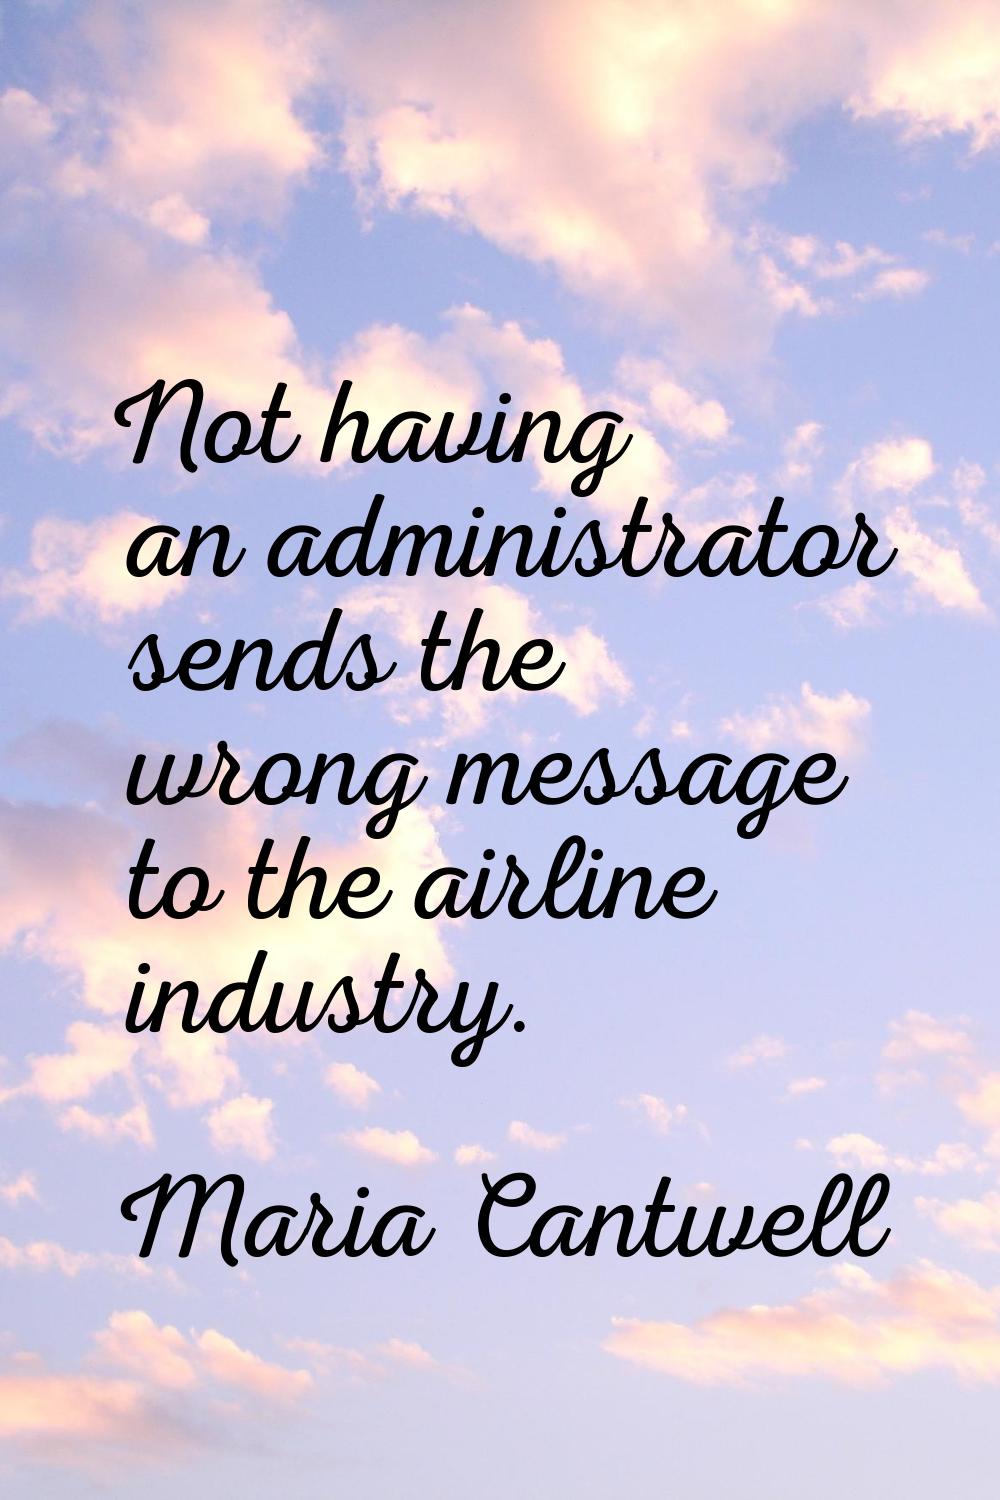 Not having an administrator sends the wrong message to the airline industry.